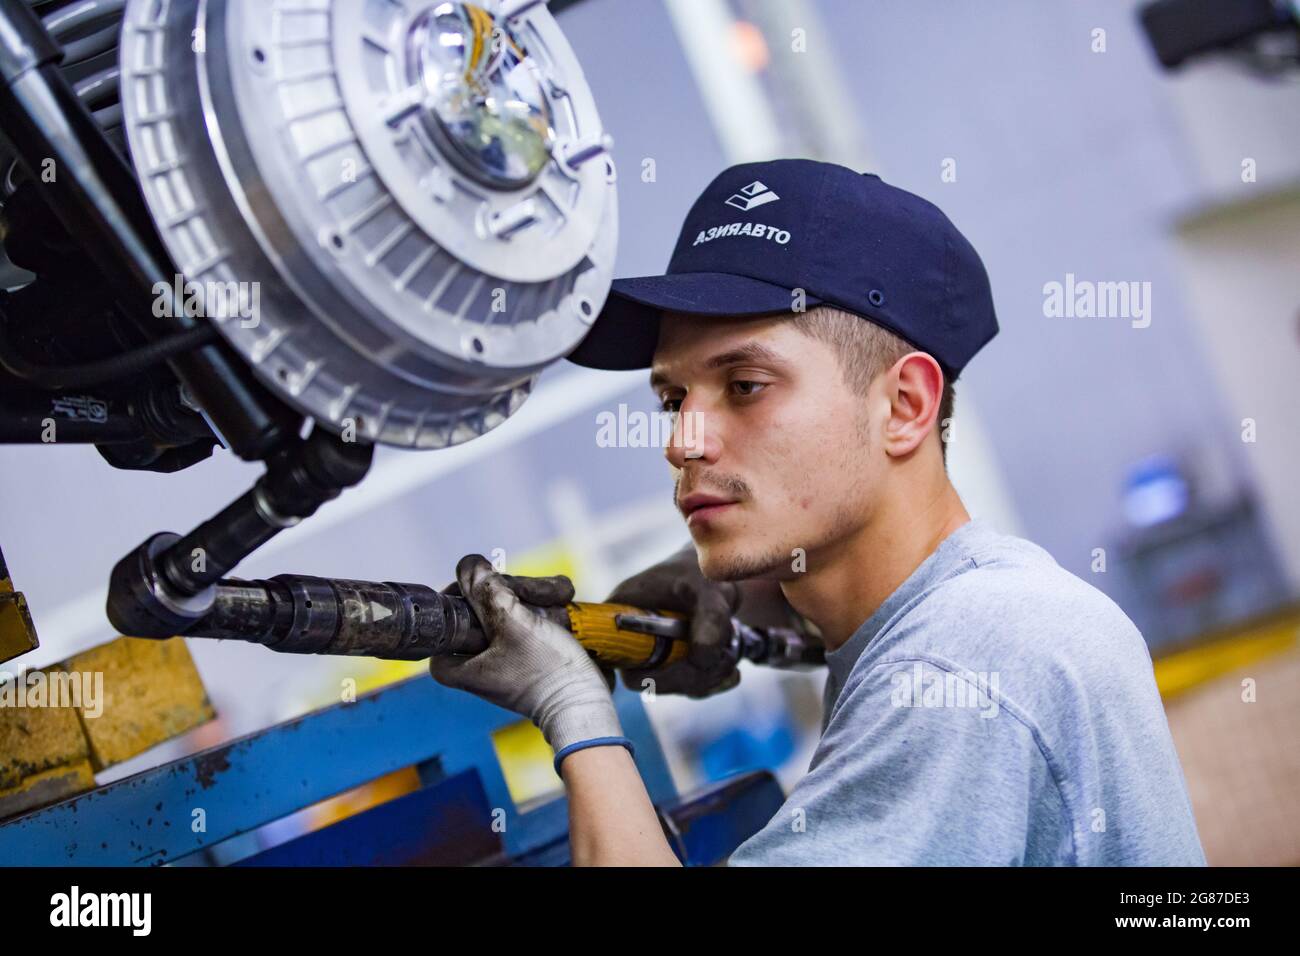 Ust'-Kamenogorsk,Kazakhstan,May31,2012:Asia-Auto company building plant.Worker assembling wheel hub and car suspension.Using pneumatic wrench tool. Stock Photo